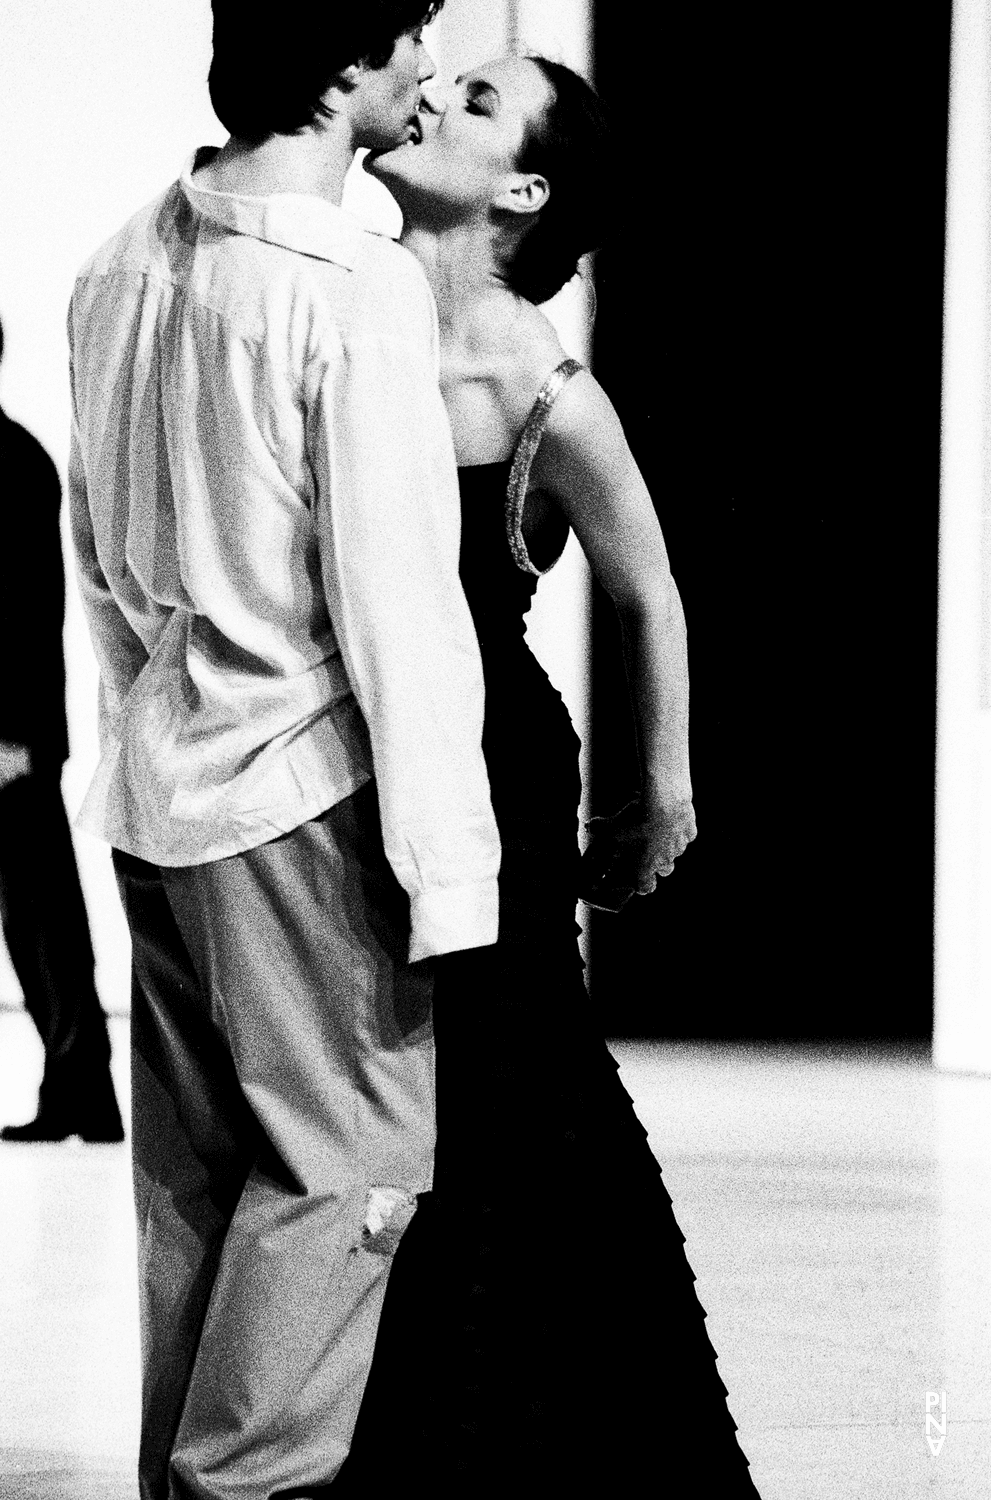 Julie Anne Stanzak and Rainer Behr in “For the Children of Yesterday, Today and Tomorrow” by Pina Bausch